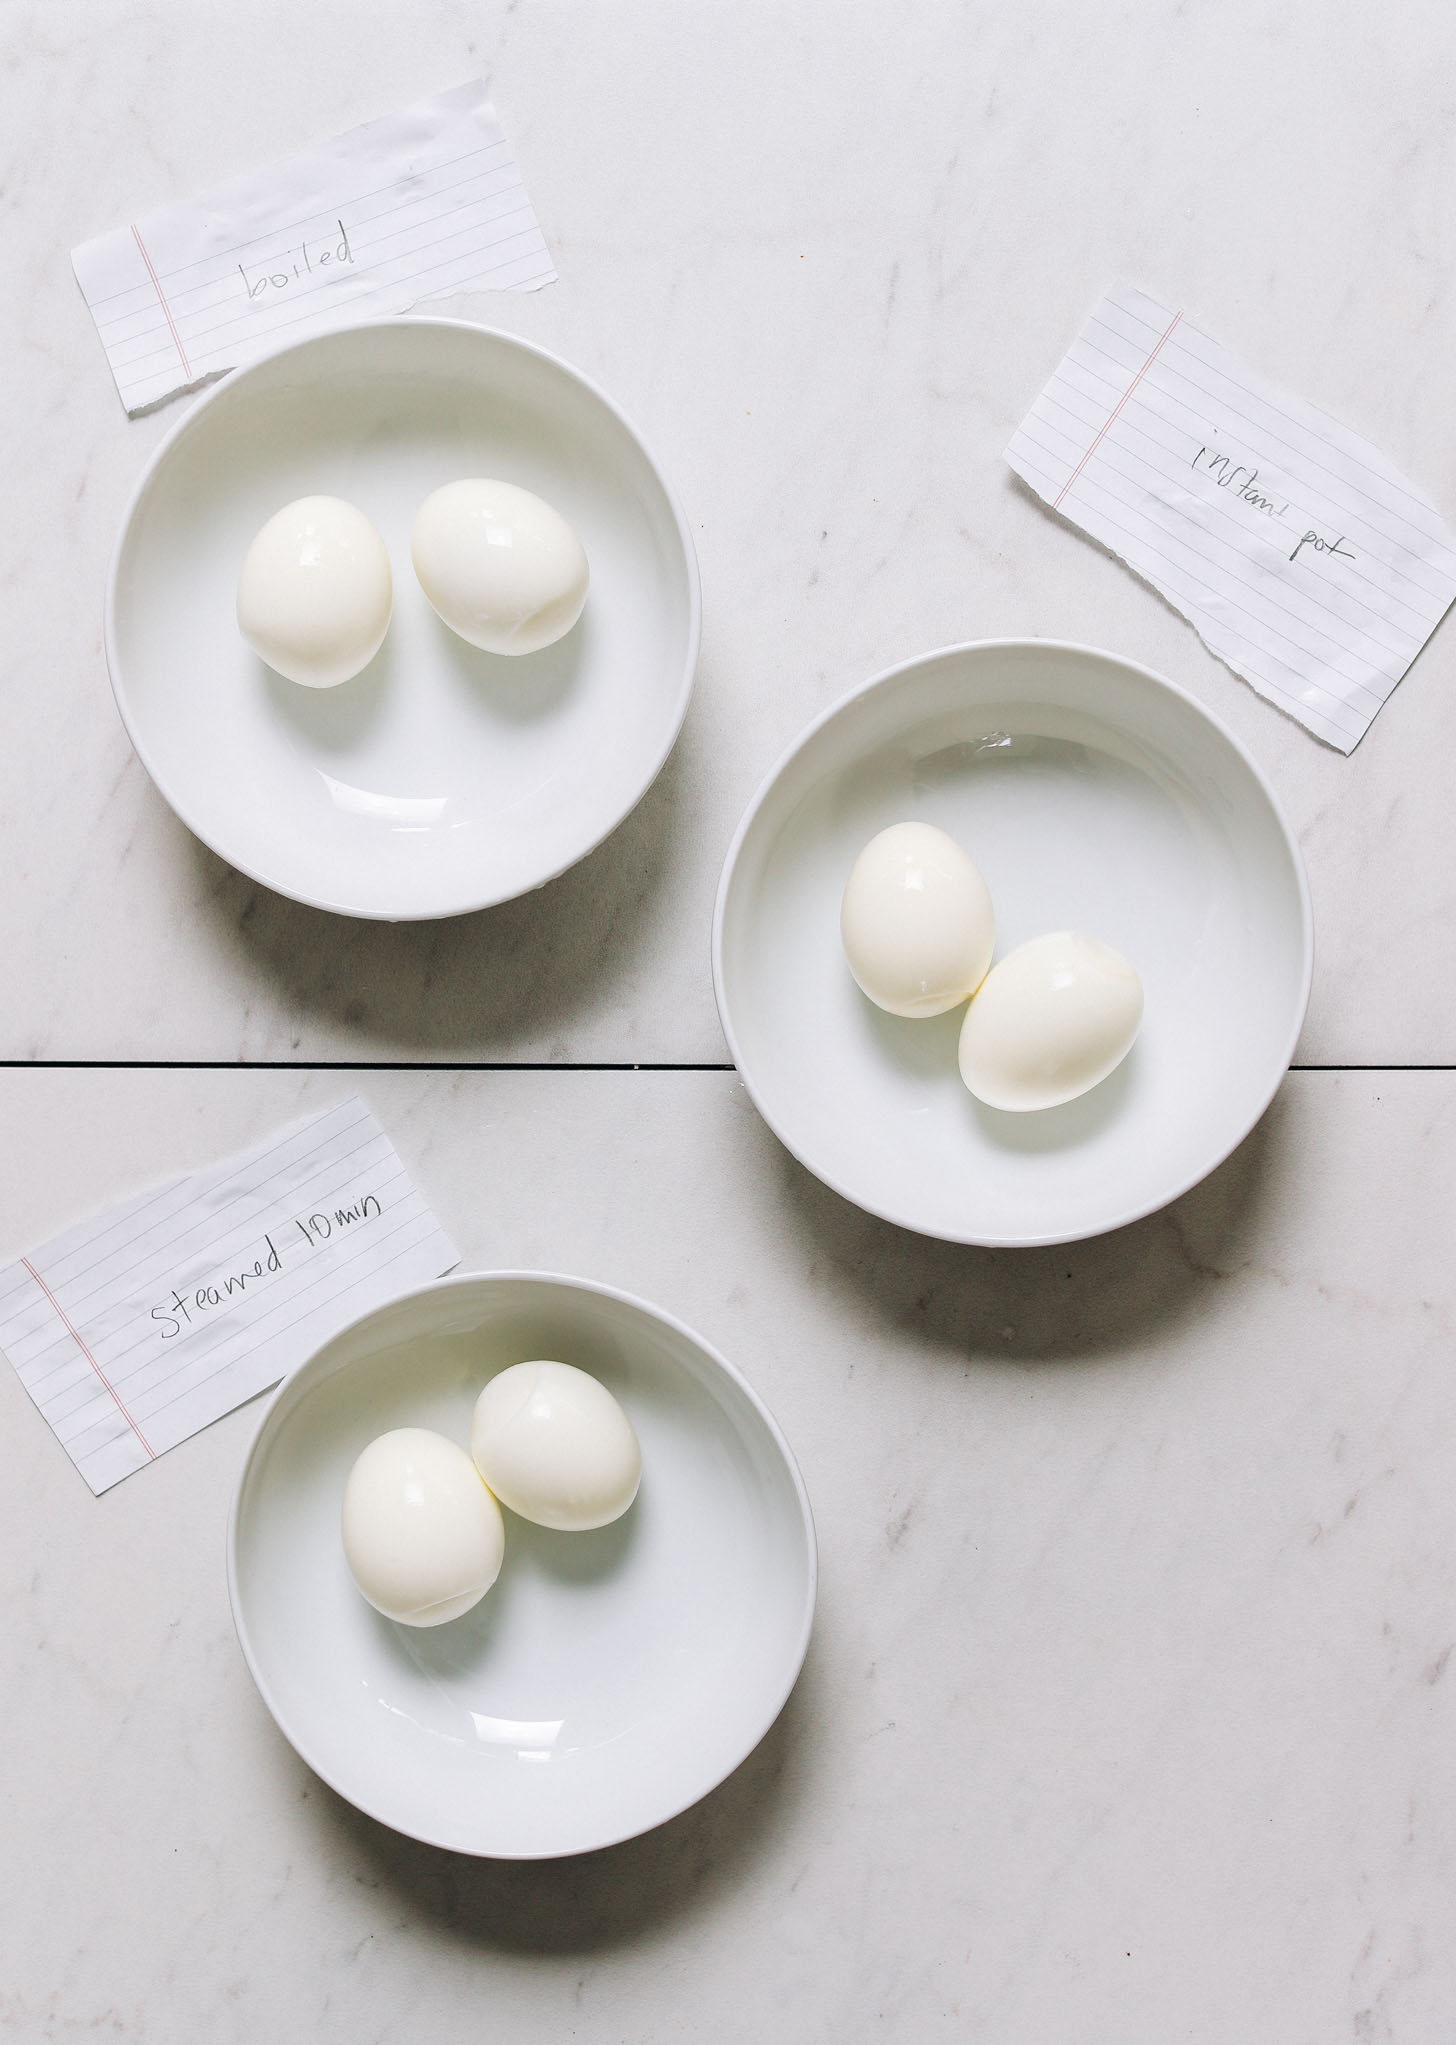 Bowls of perfectly cooked hard boiled eggs made using three methods: boiled, steamed, and in an Instant Pot